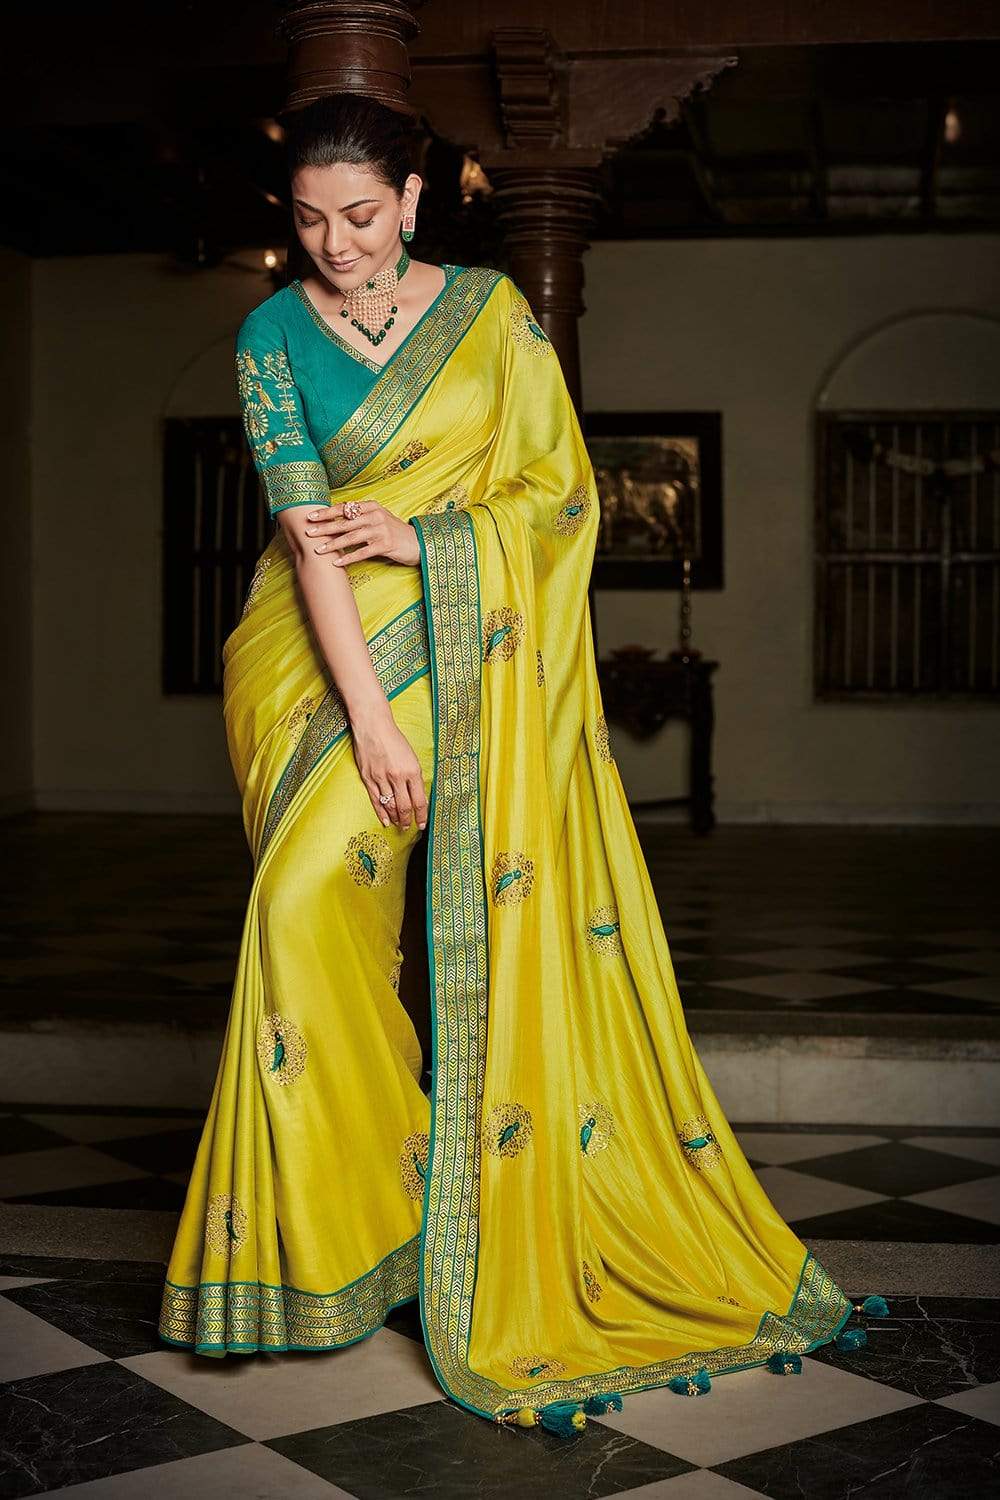 Nalli - Nandhini looks stunning in our bright yellow silk saree with  checked design enclosing intricately woven elephant motifs. The saree is  enriched with a zari border and a scintillating pink pallu